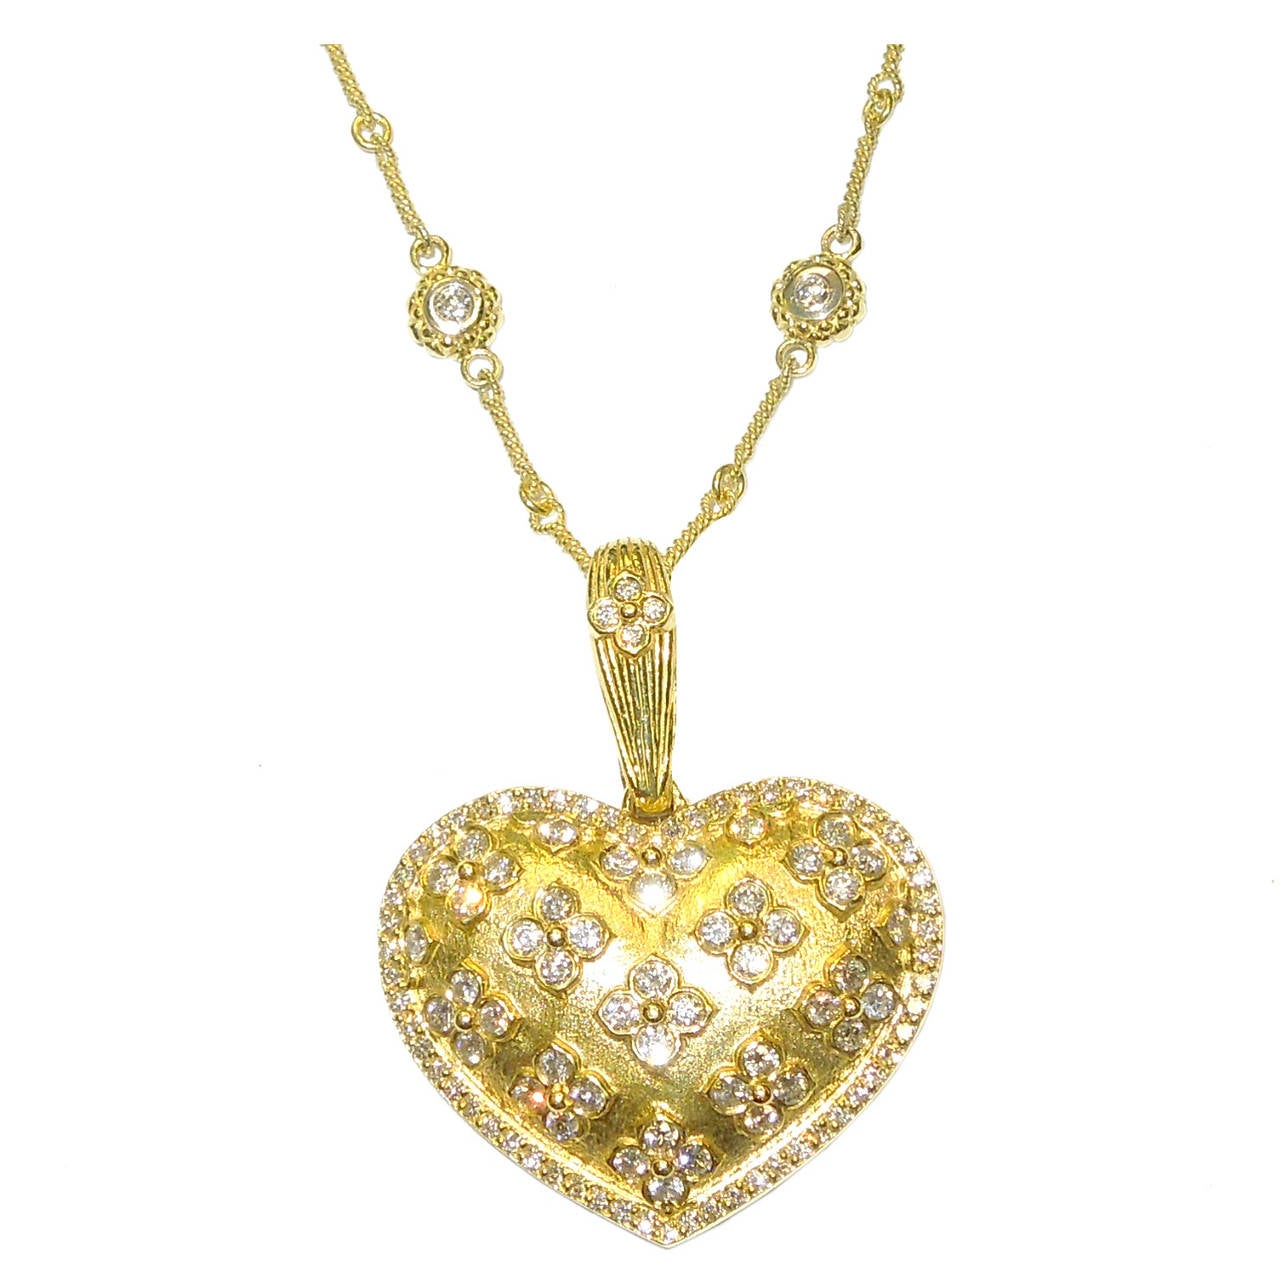 18K Gold Heart Enhancer Pendant with Diamonds

2.55 ct.'s of G Color VS Quality Diamonds set on center and around the piece and bell

From bell to bottom is 2 inches in length

1.5 inches width 

From our 